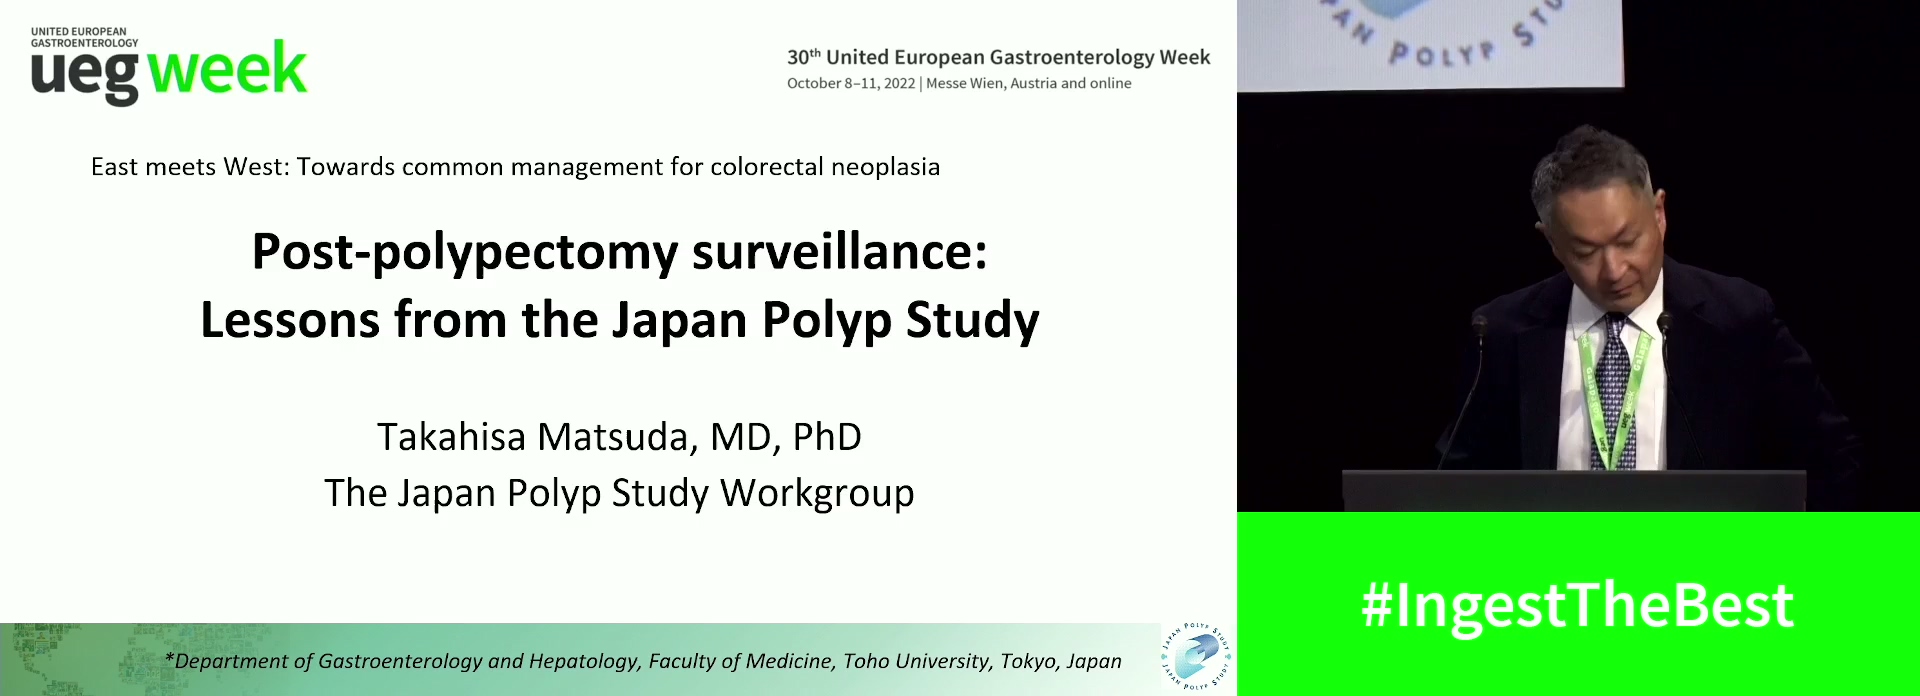 Post-polypectomy surveillance: Lessons from the Japan Polyp Study